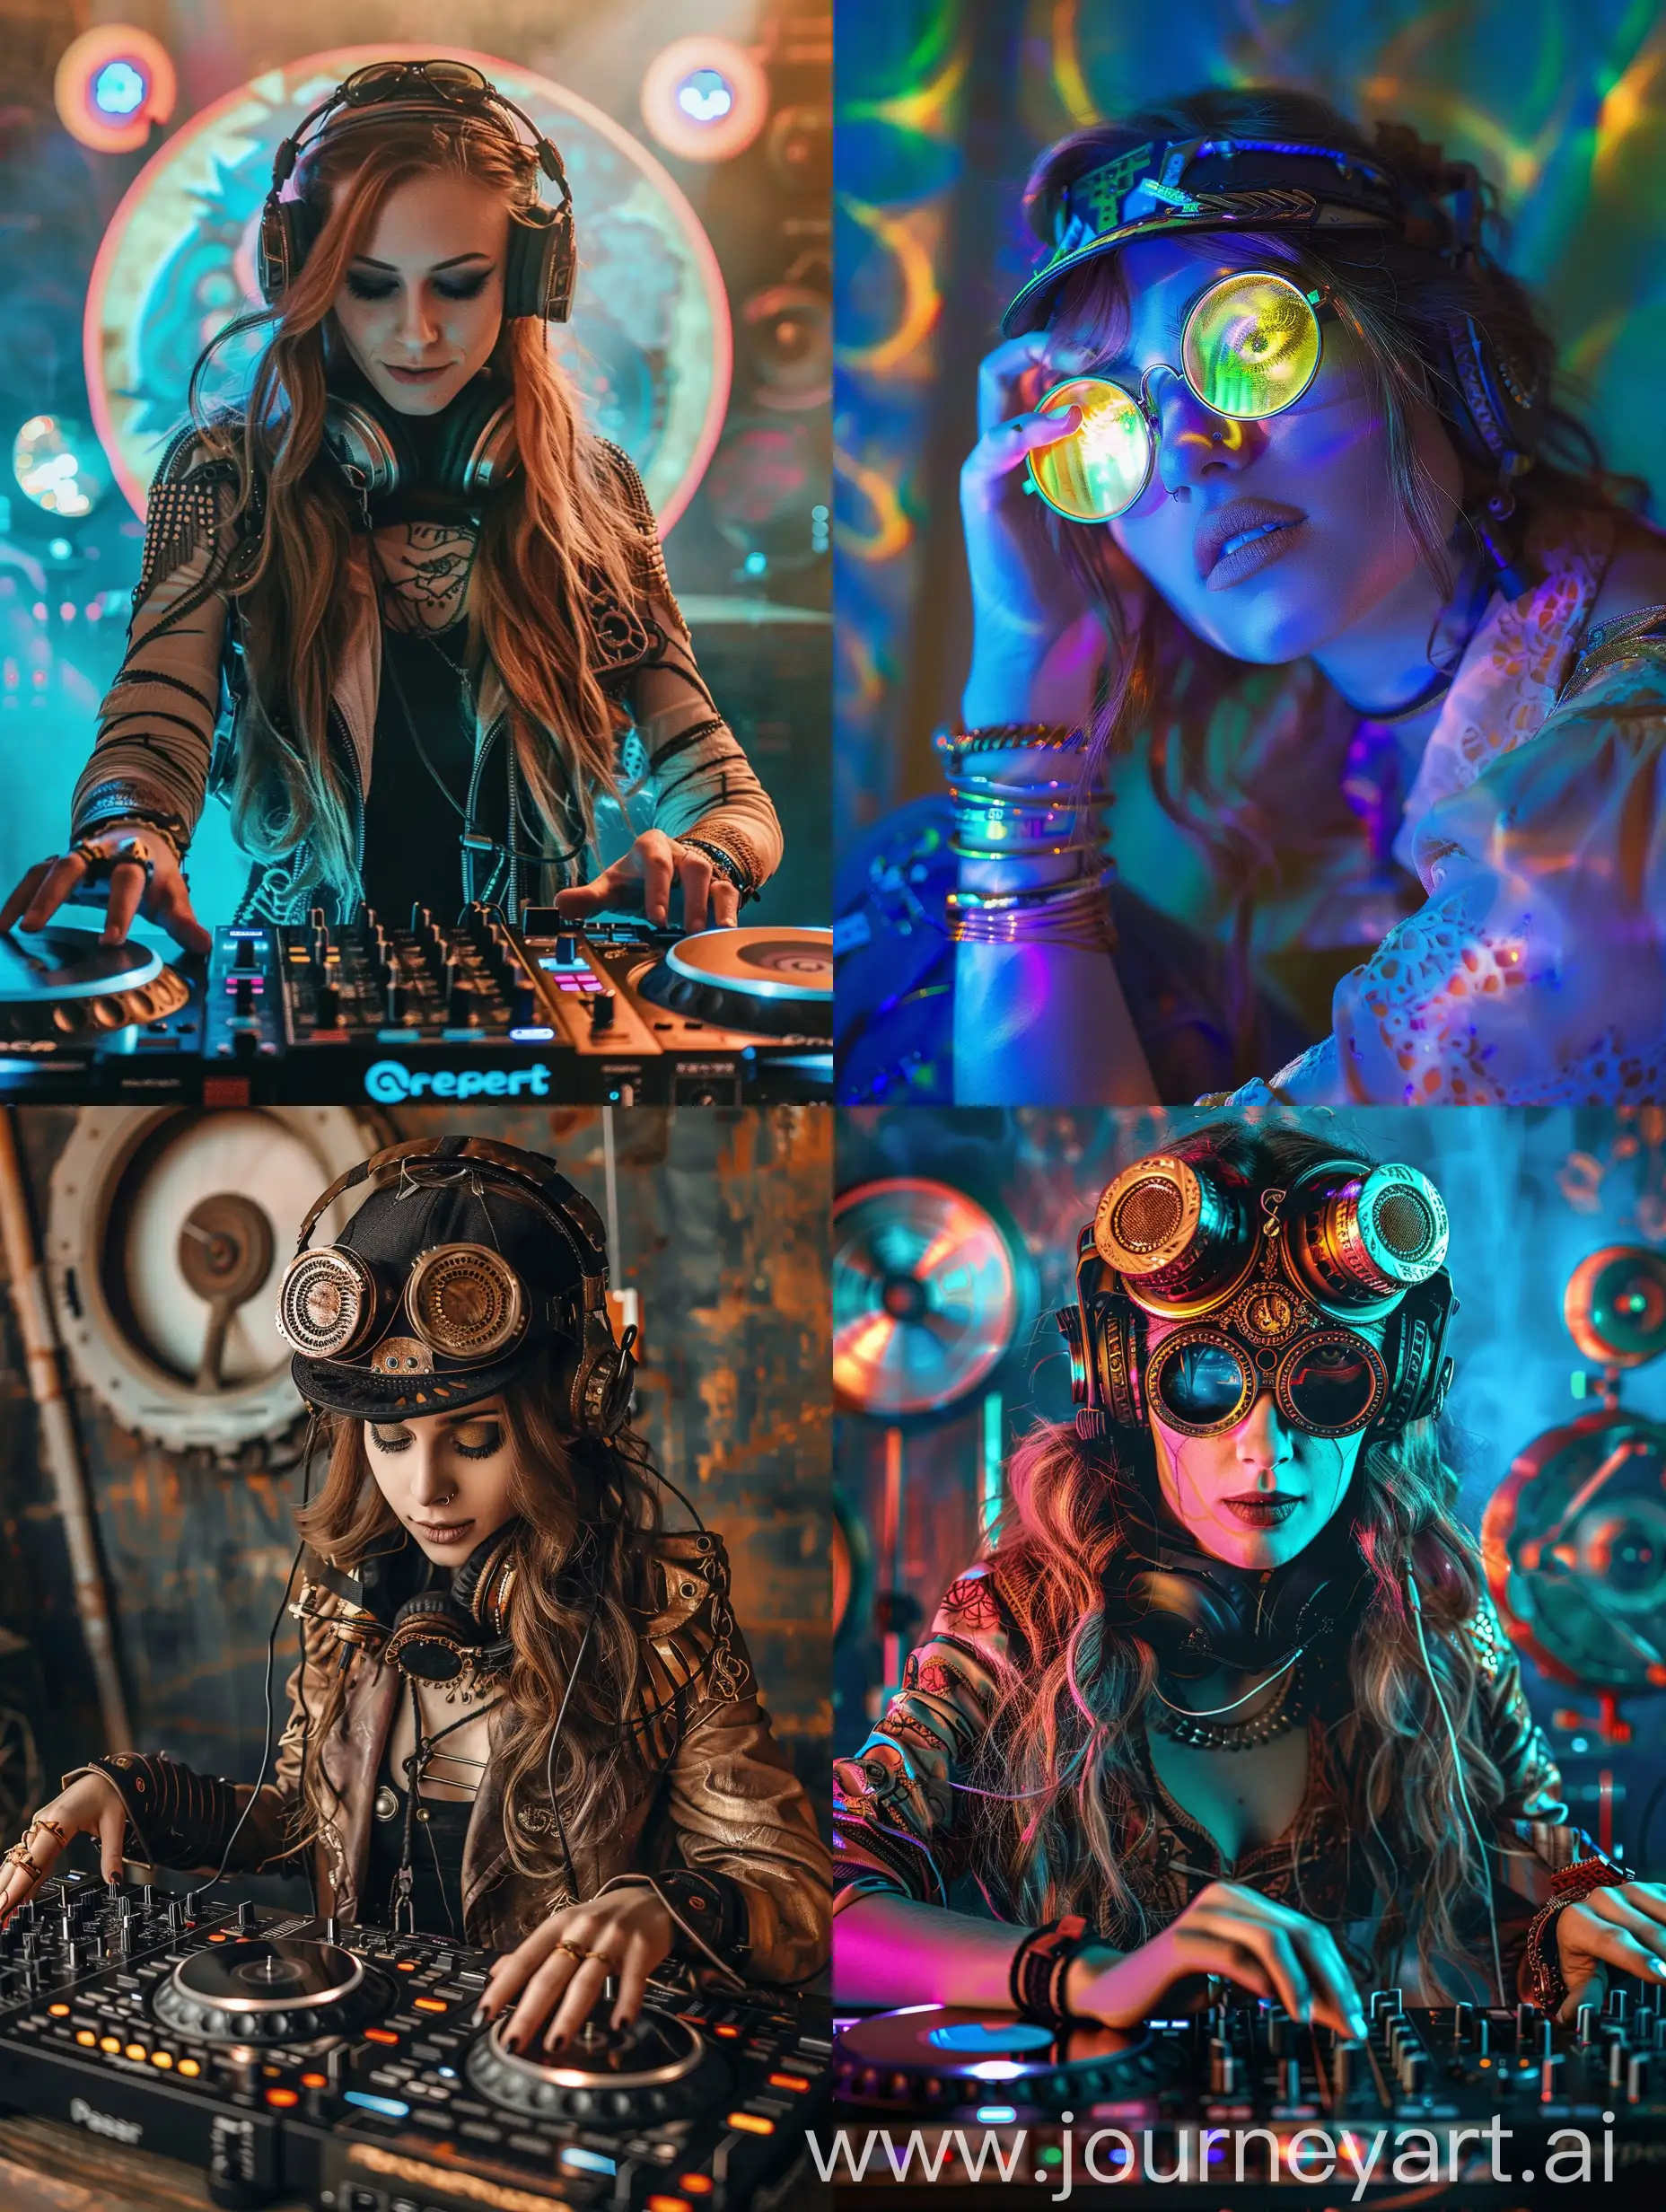 Young-Woman-Steampunk-DJ-with-Psychedelic-Lighting